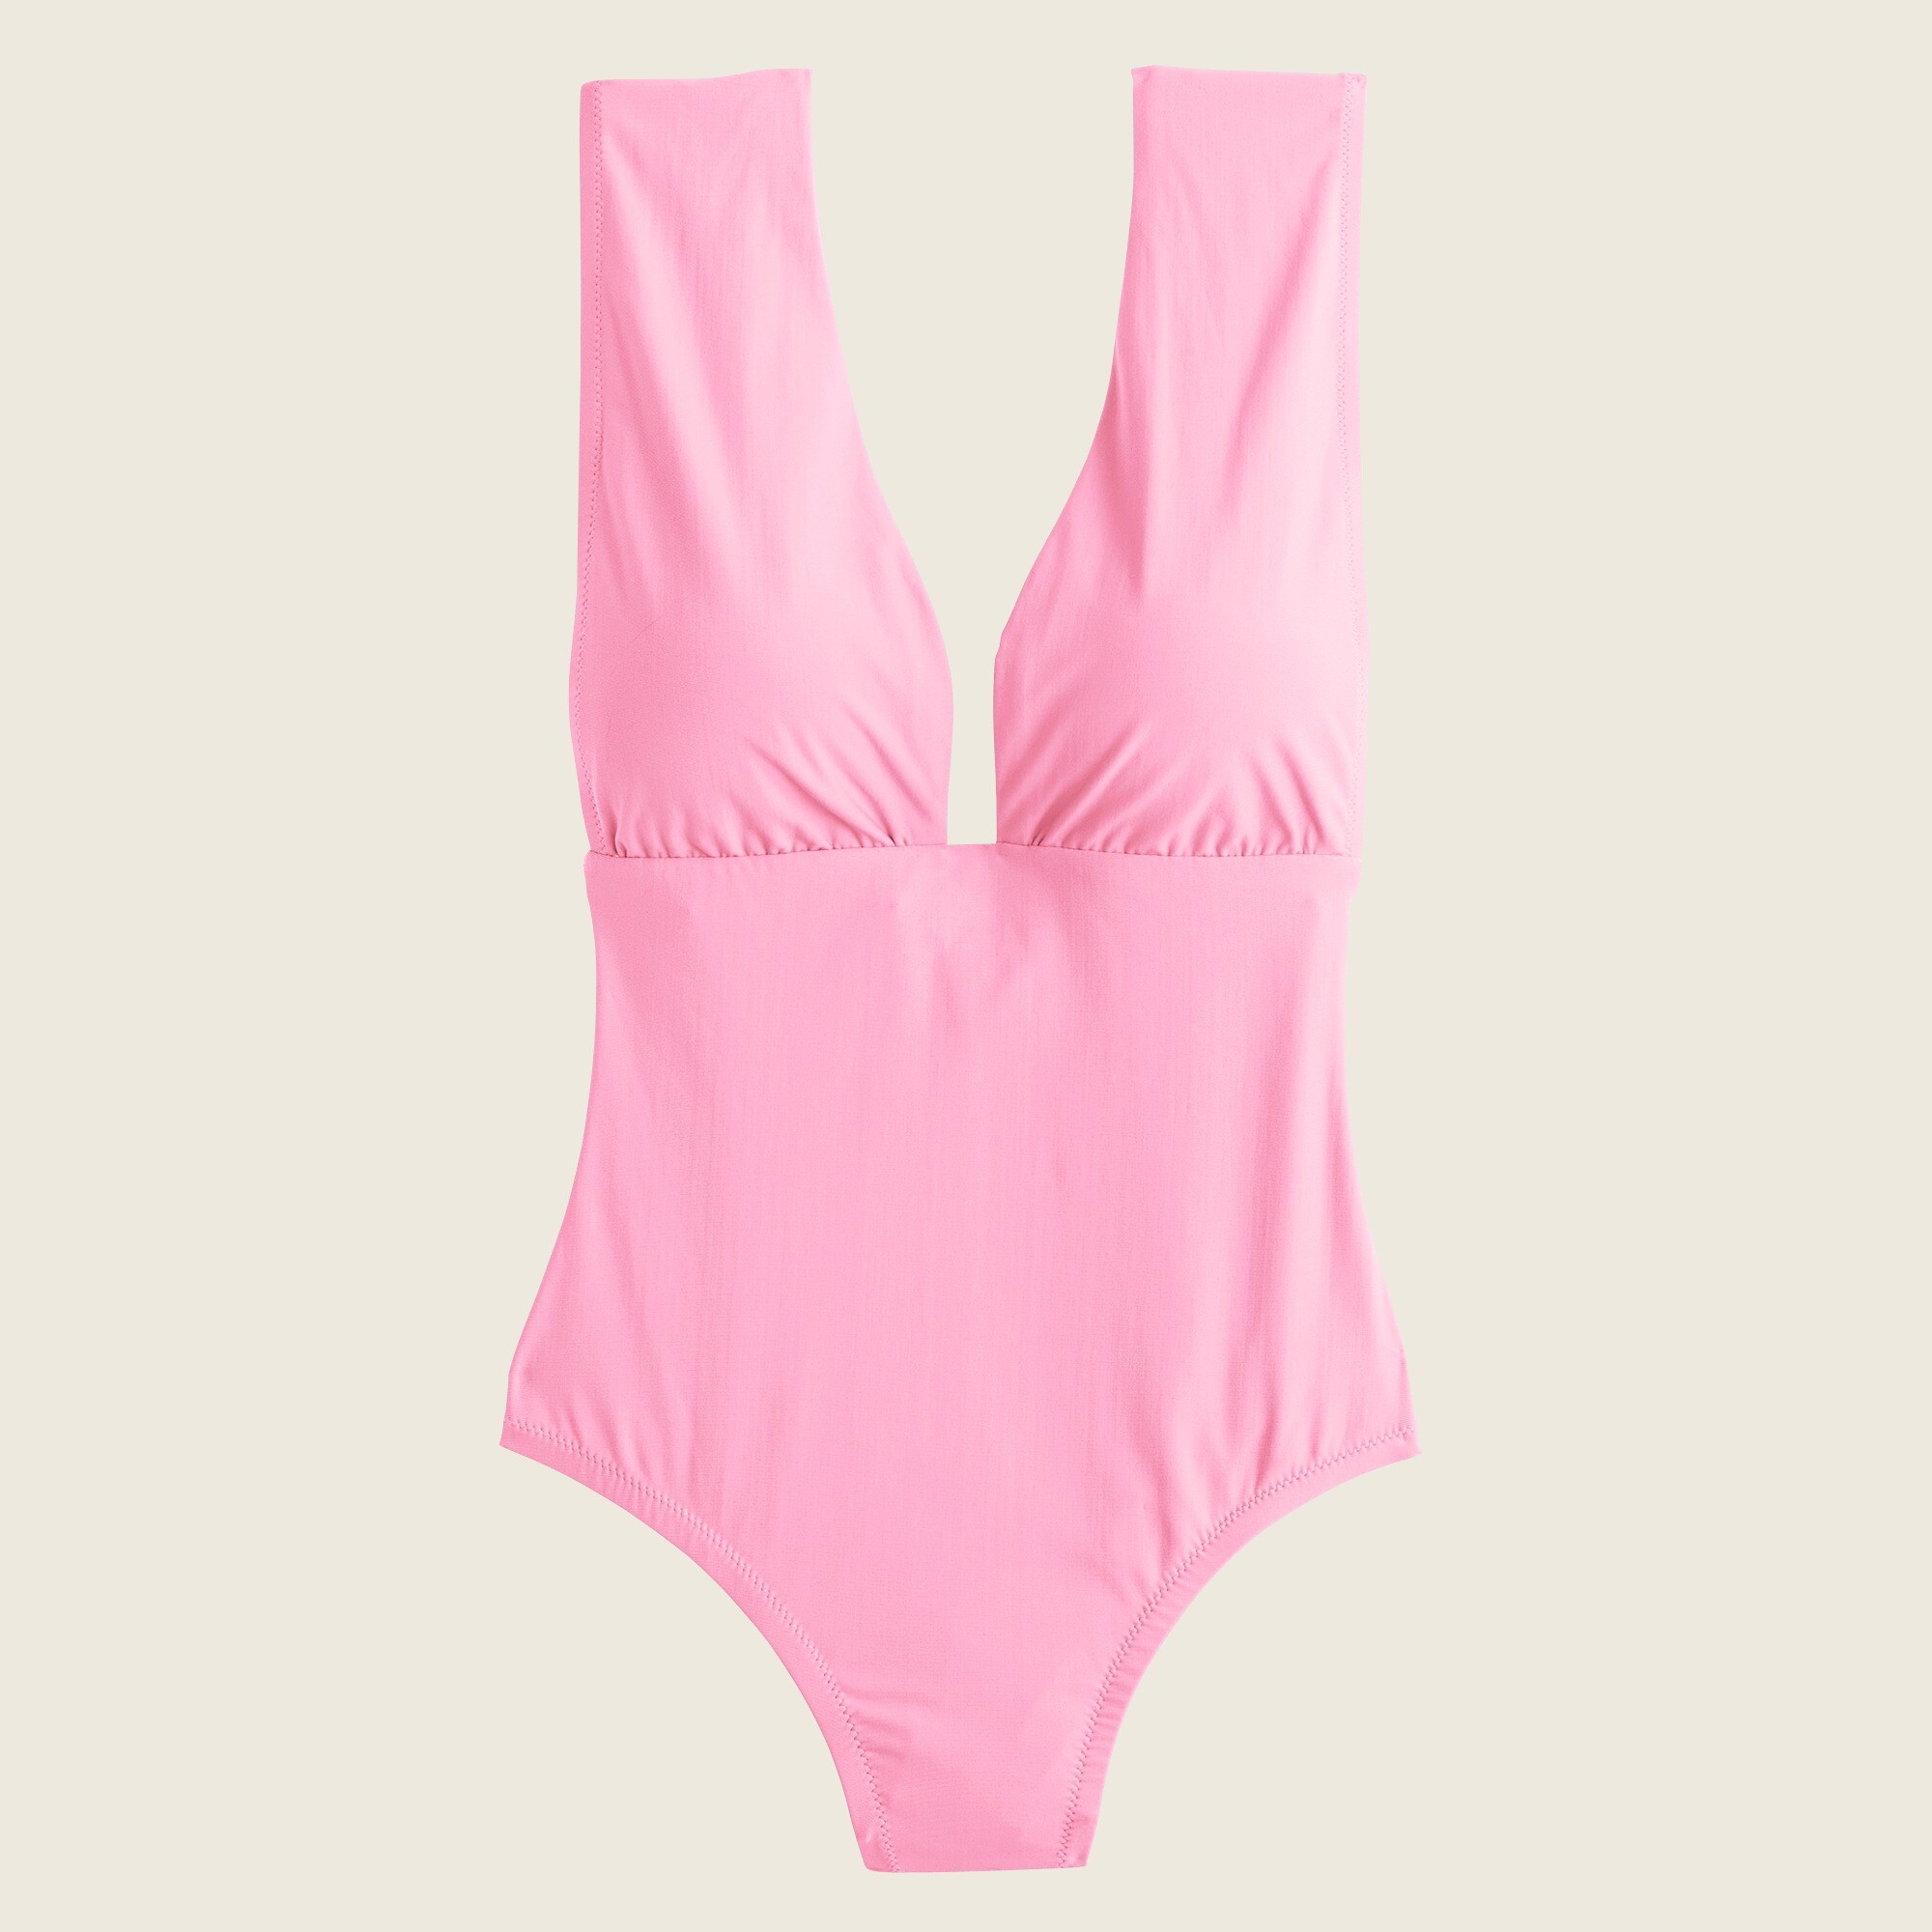 J.Crew: Plunge V-neck One-piece Swimsuit For Women